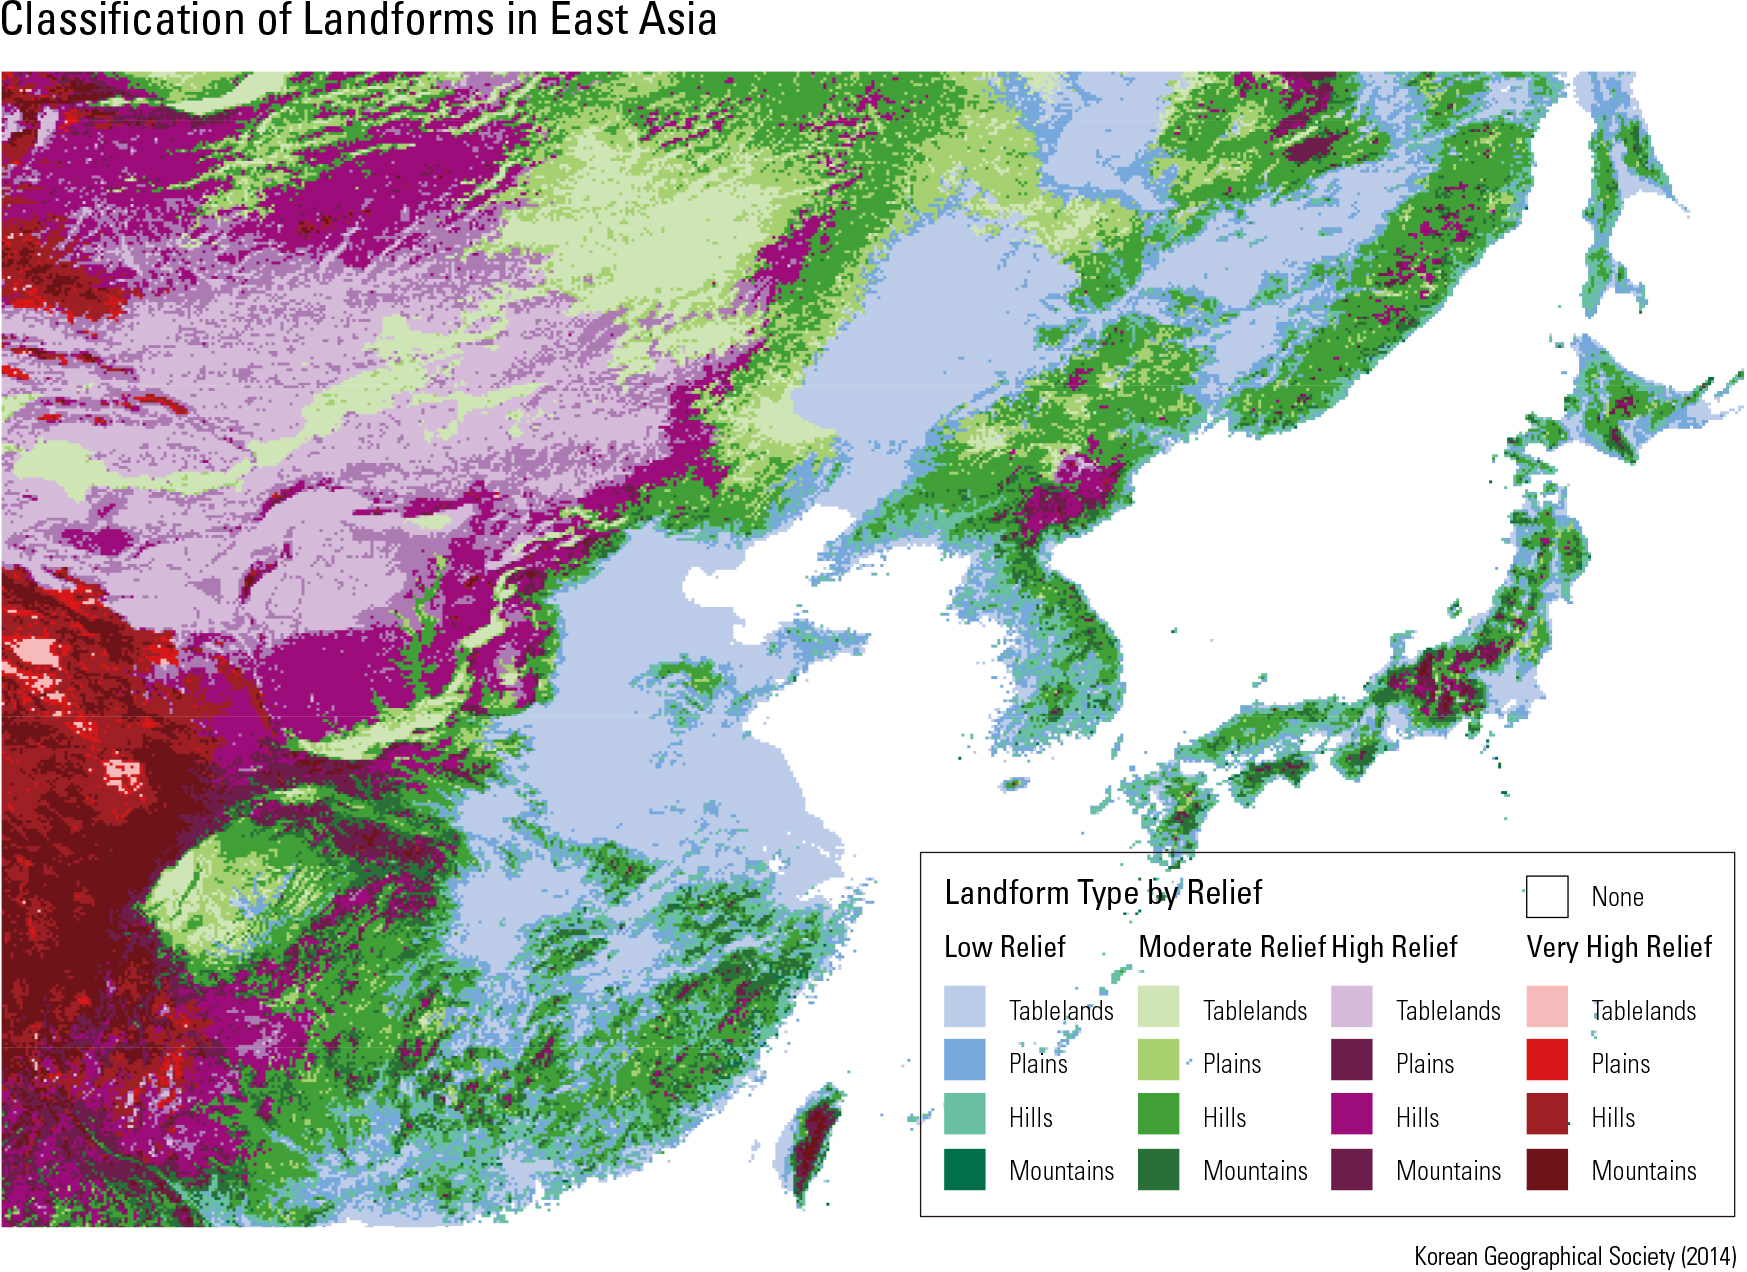 Classi cation of Landforms in East Asia